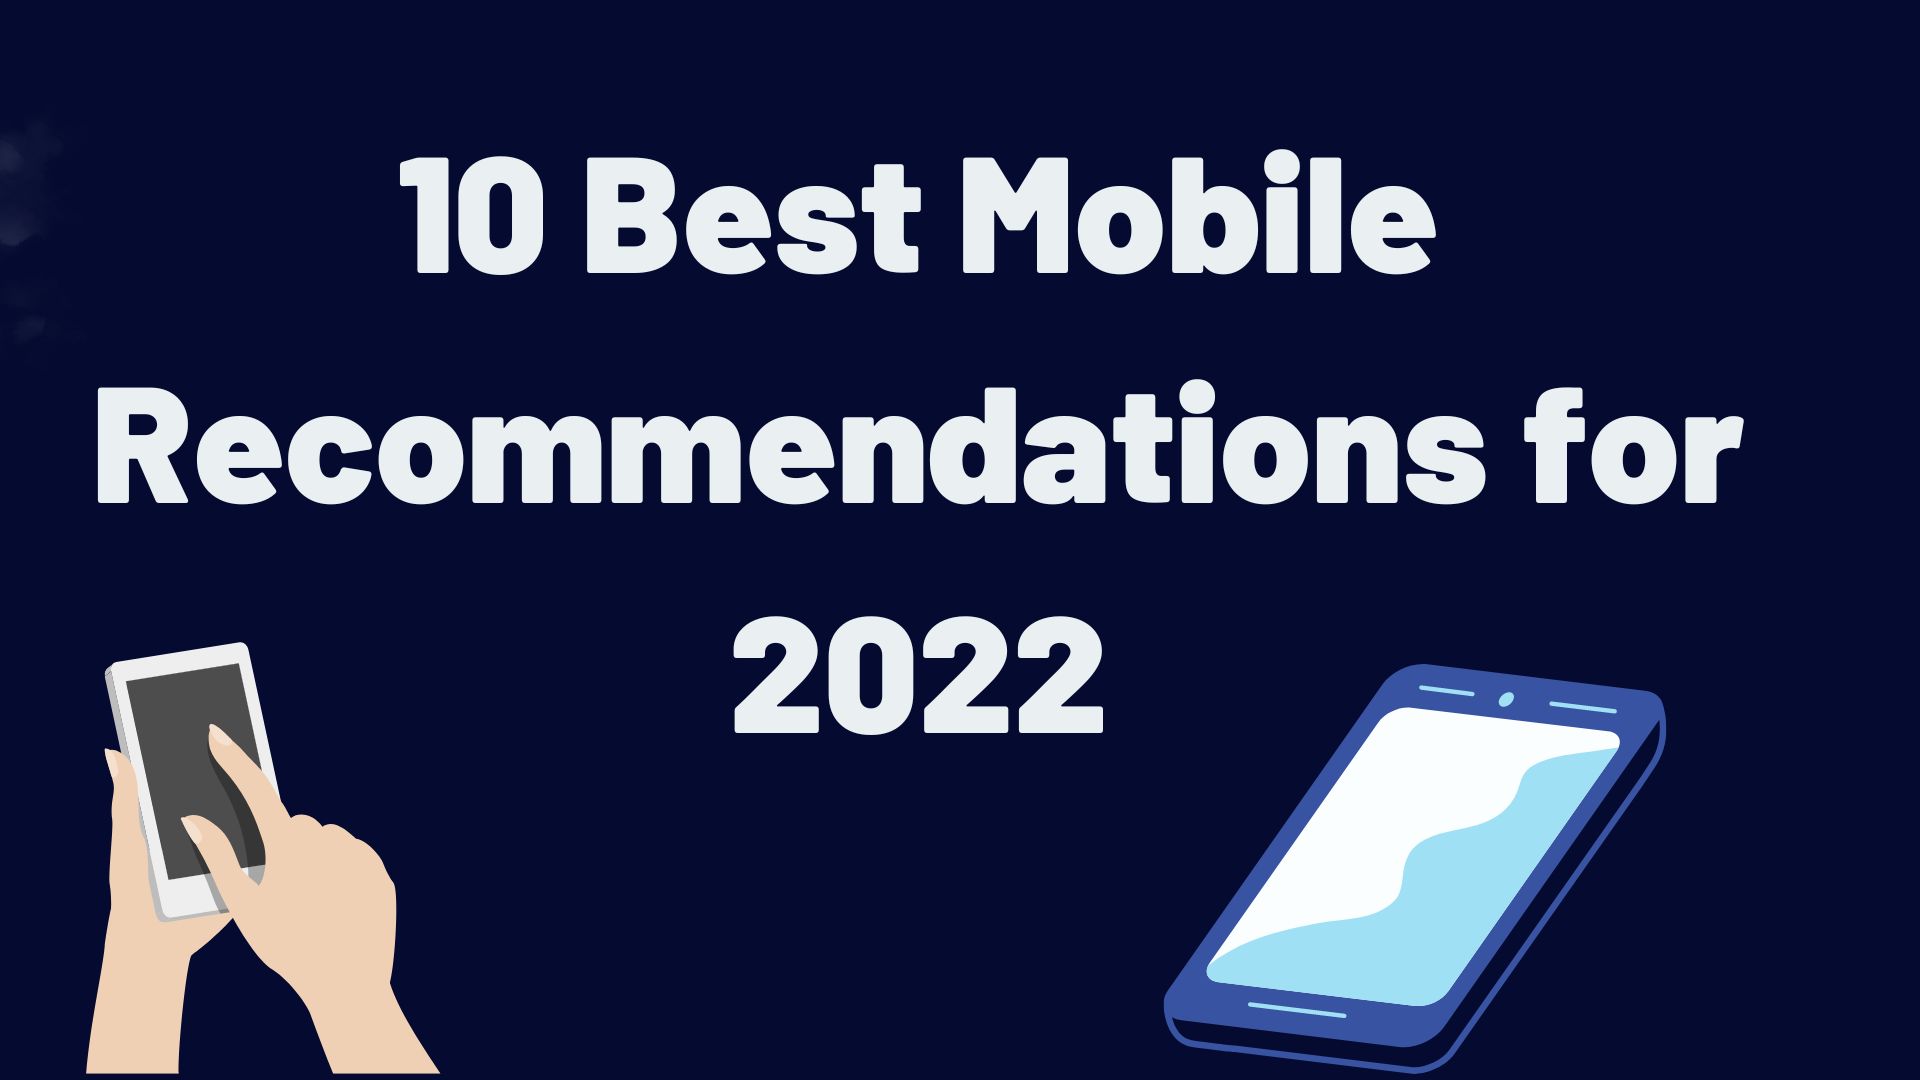 10 Best Mobile Recommendations for 2022